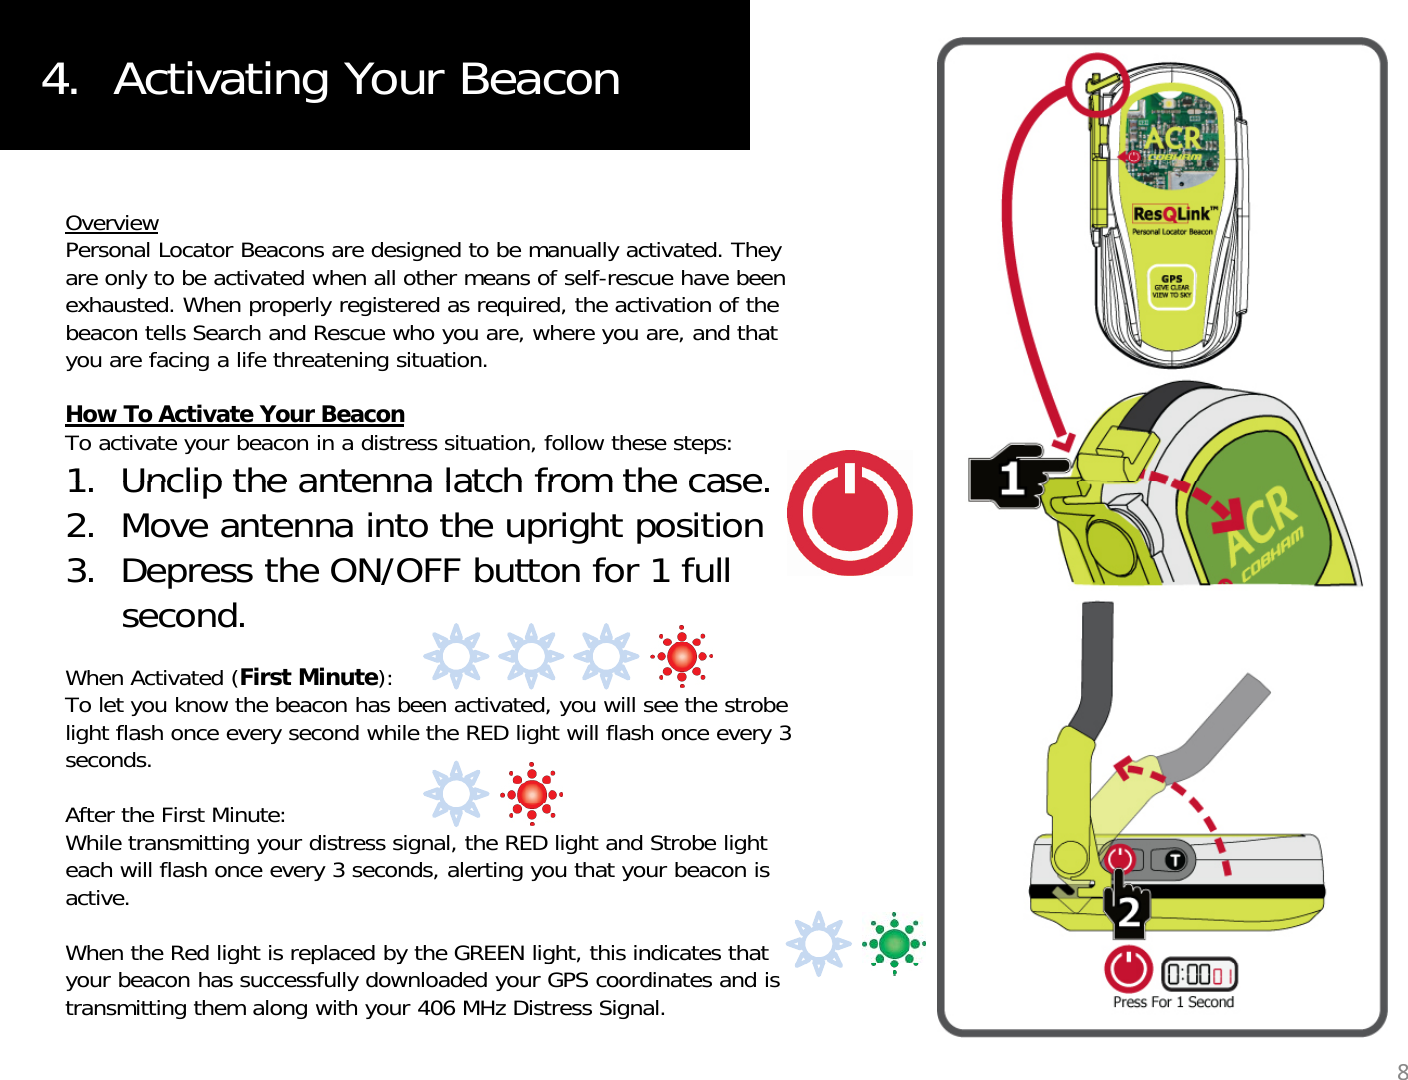 4.  Activating Your BeaconOverviewPersonal Locator Beacons are designed to be manually activated. They are only to be activated when all other means of self-rescue have been exhausted. When properly registered as required, the activation of the beacon tells Search and Rescue who you are, where you are, and that you are facing a life threatening situation.How To Activate Your BeaconTo activate your beacon in a distress situation, follow these steps:1 Unclip the antenna latch from the case1.  Unclip the antenna latch from the case.2.  Move antenna into the upright position  3.  Depress the ON/OFF button for 1 full second.When Activated (First Minute):To let you know the beacon has been activated, you will see the strobe light flash once every second while the RED light will flash once every 3 seconds.After the First Minute:While transmitting your distress signal, the RED light and Strobe light each will flash once every 3 seconds, alerting you that your beacon is active. When the Red light is replaced by the GREEN light, this indicates that gpy g,your beacon has successfully downloaded your GPS coordinates and is transmitting them along with your 406 MHz Distress Signal.8